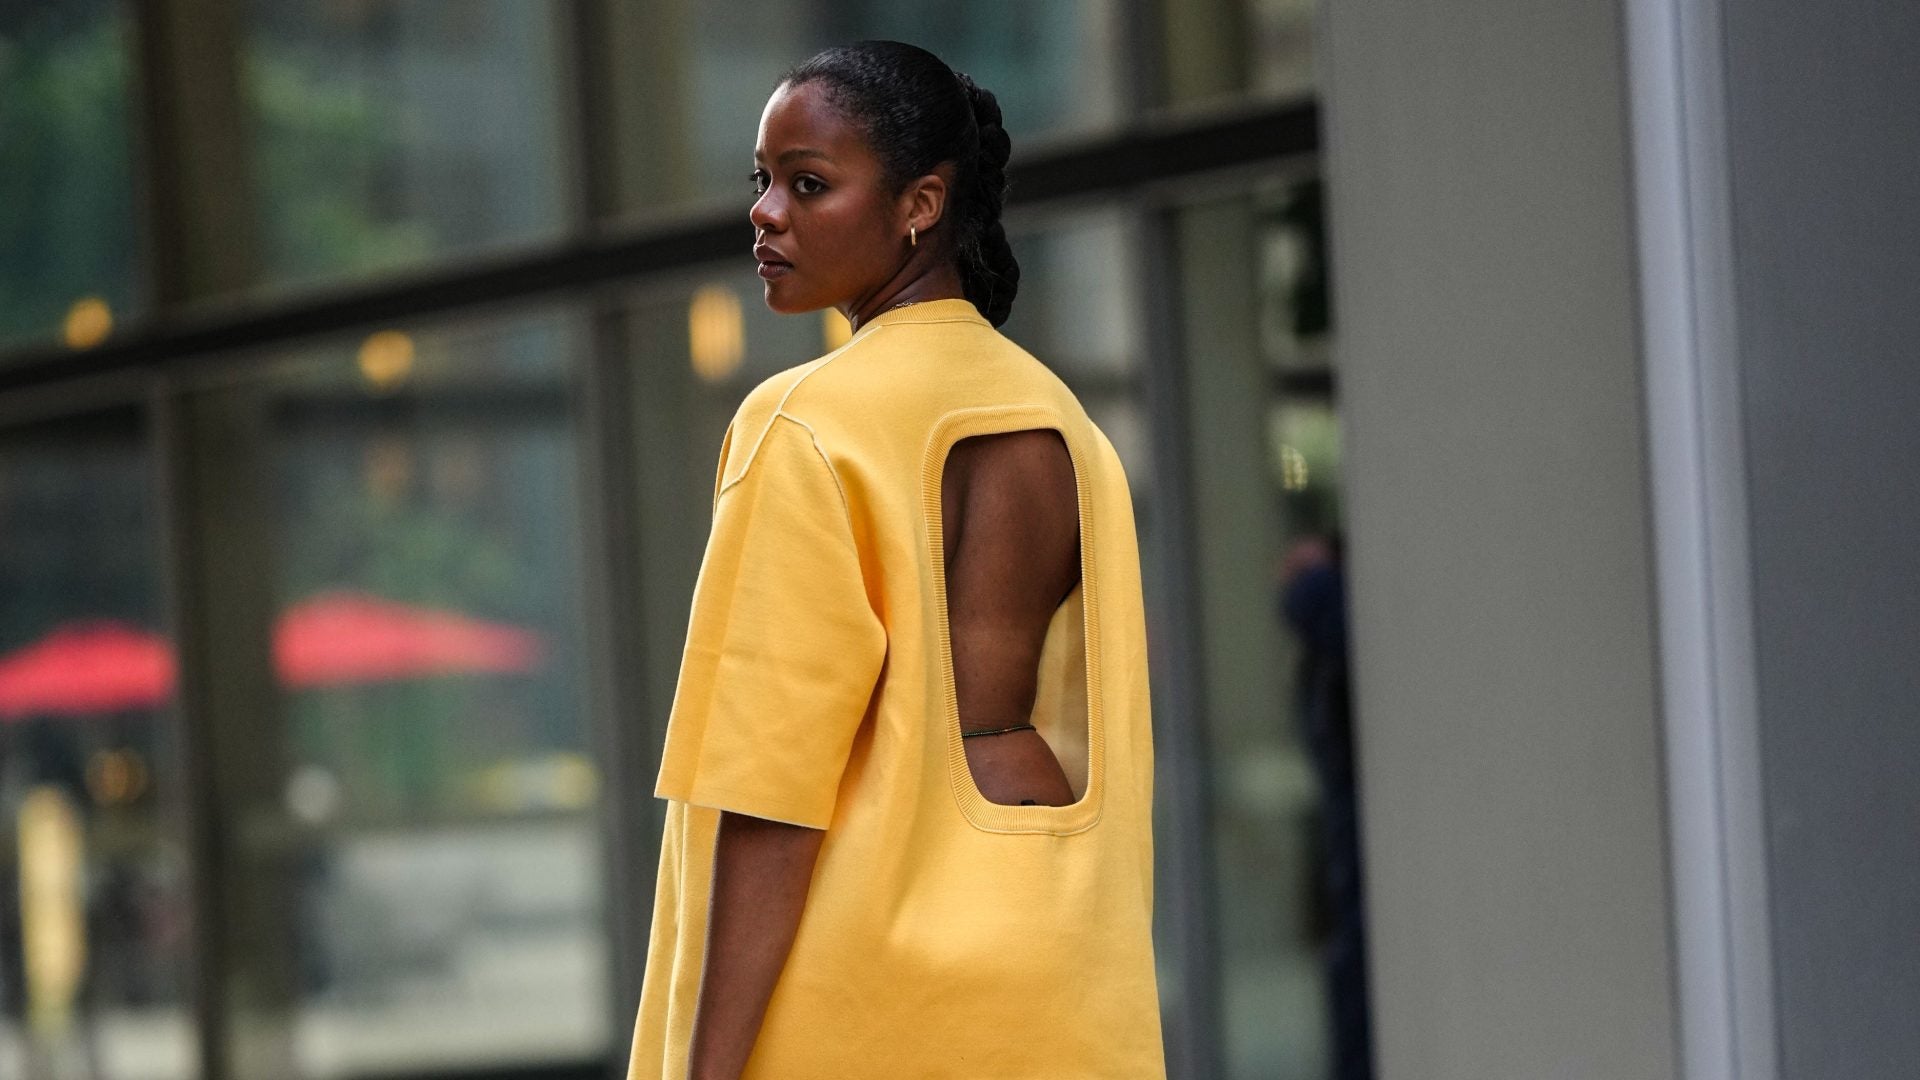 Backless Tops Are Trending, Here's How To Wear Them